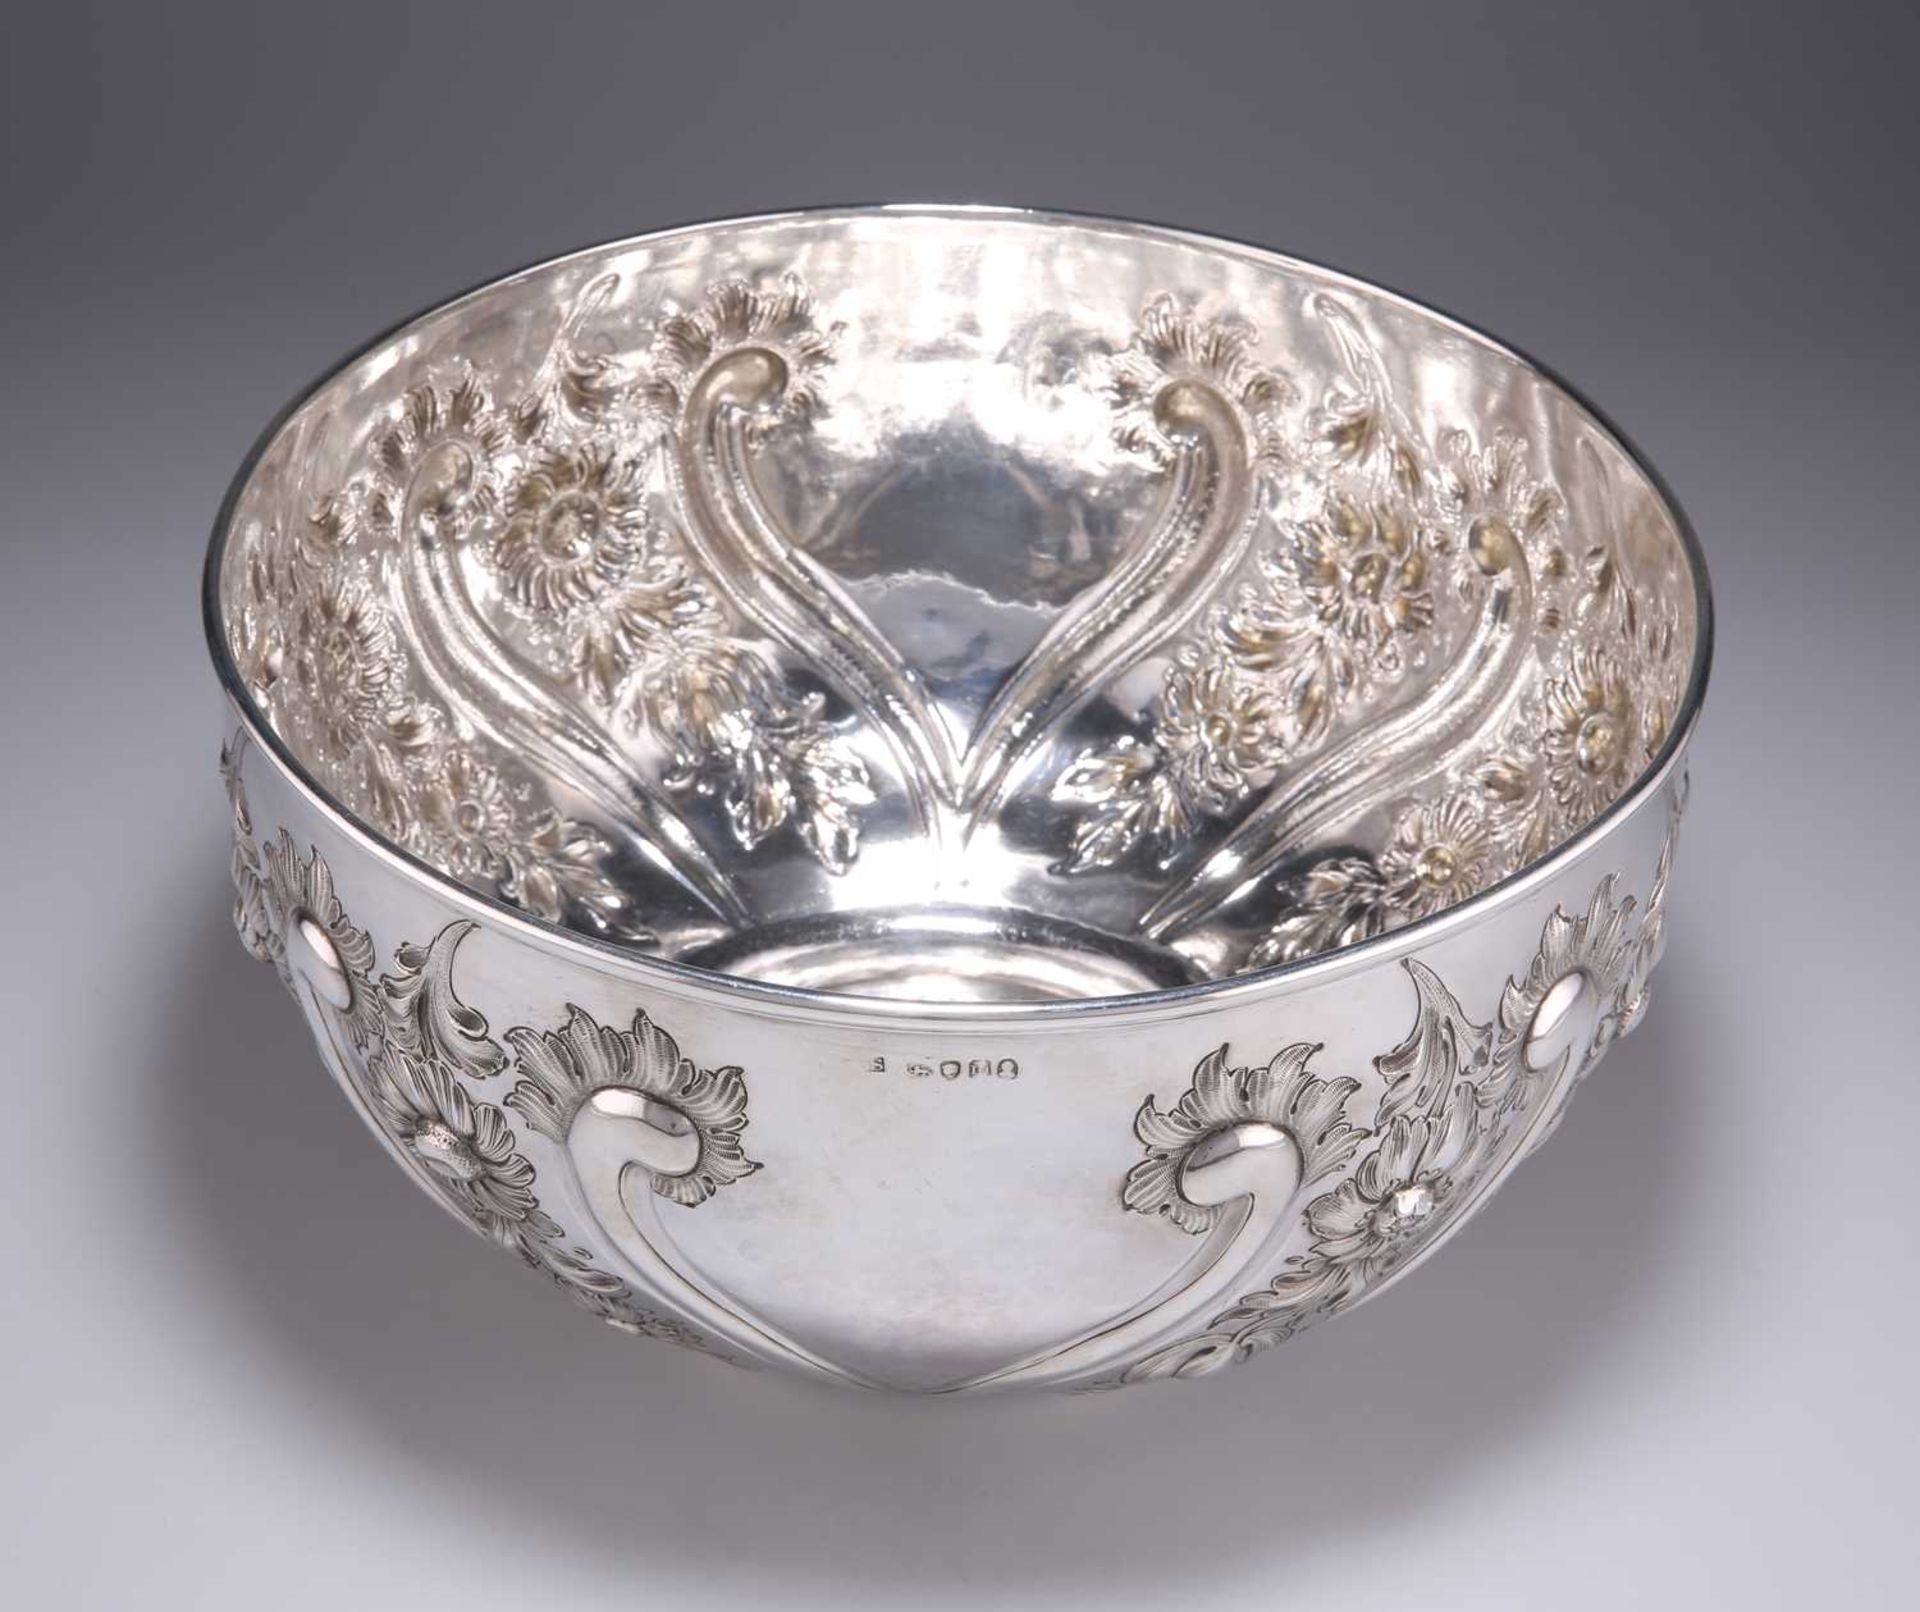 A GEORGE IV LARGE SILVER PUNCH BOWL - Image 3 of 4